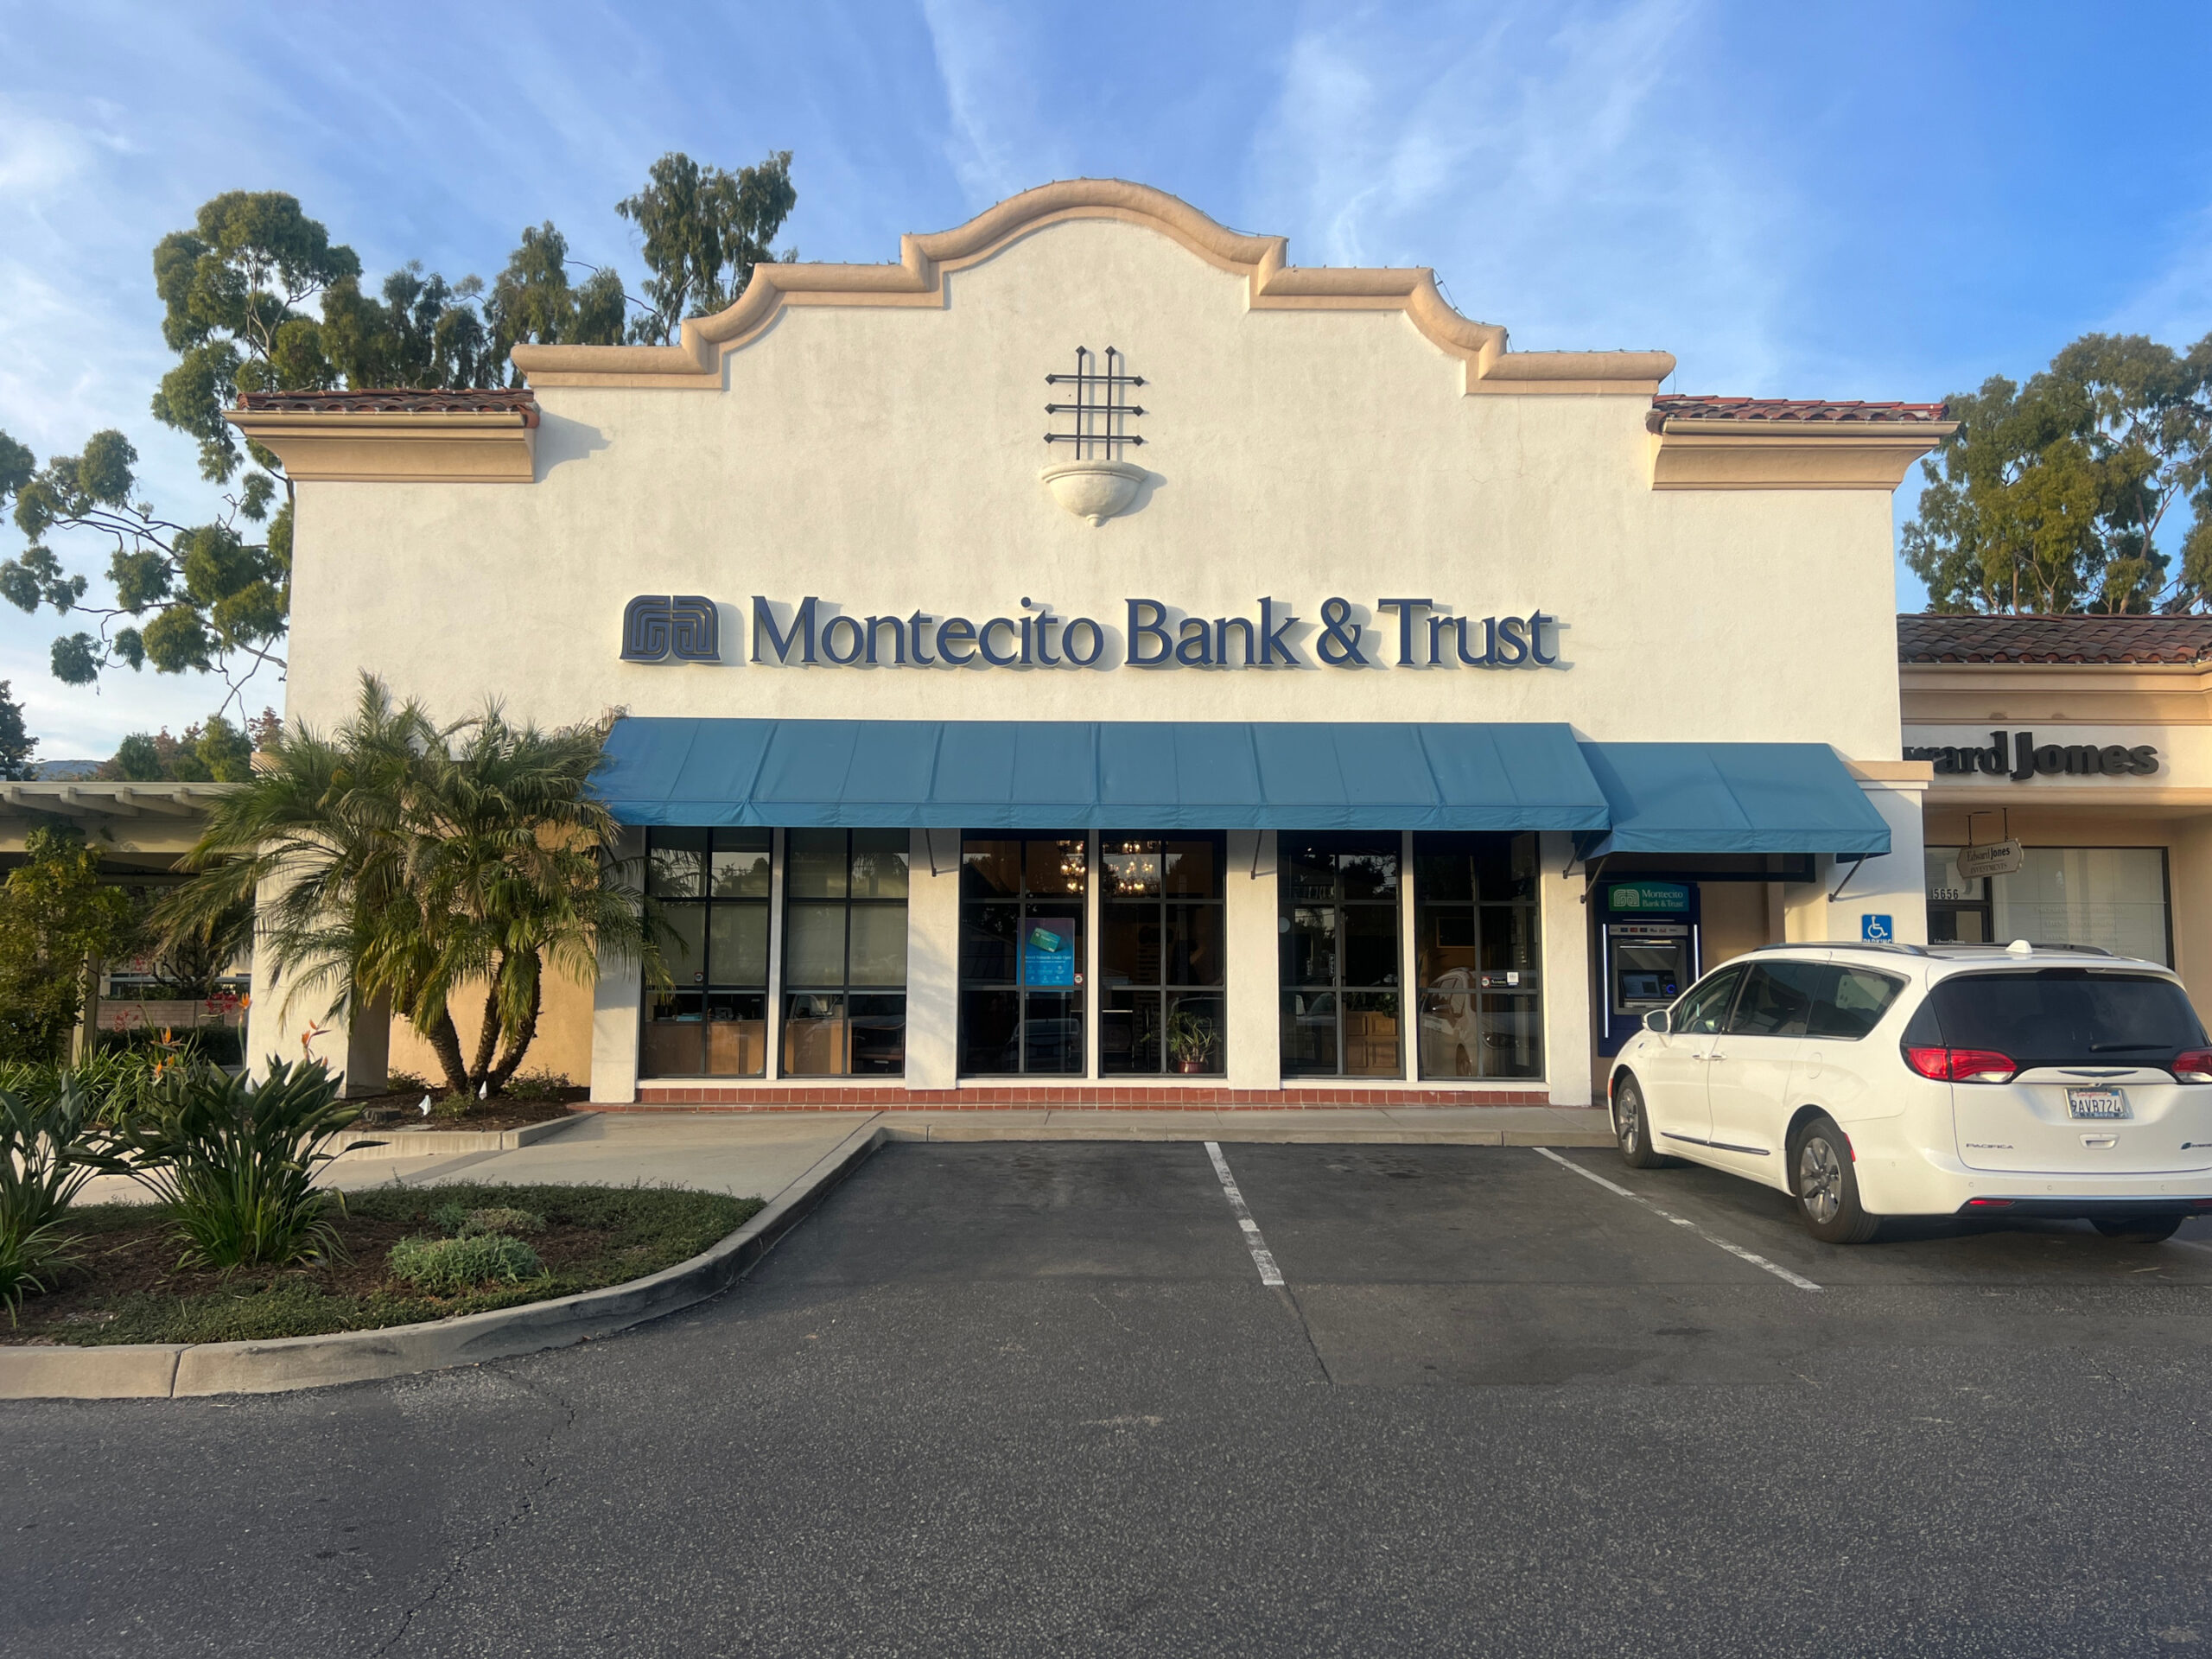 Goleta signs – Bank signs like this one for Montecito Bank & Trust are one of our specialties. We have several banks as customers.